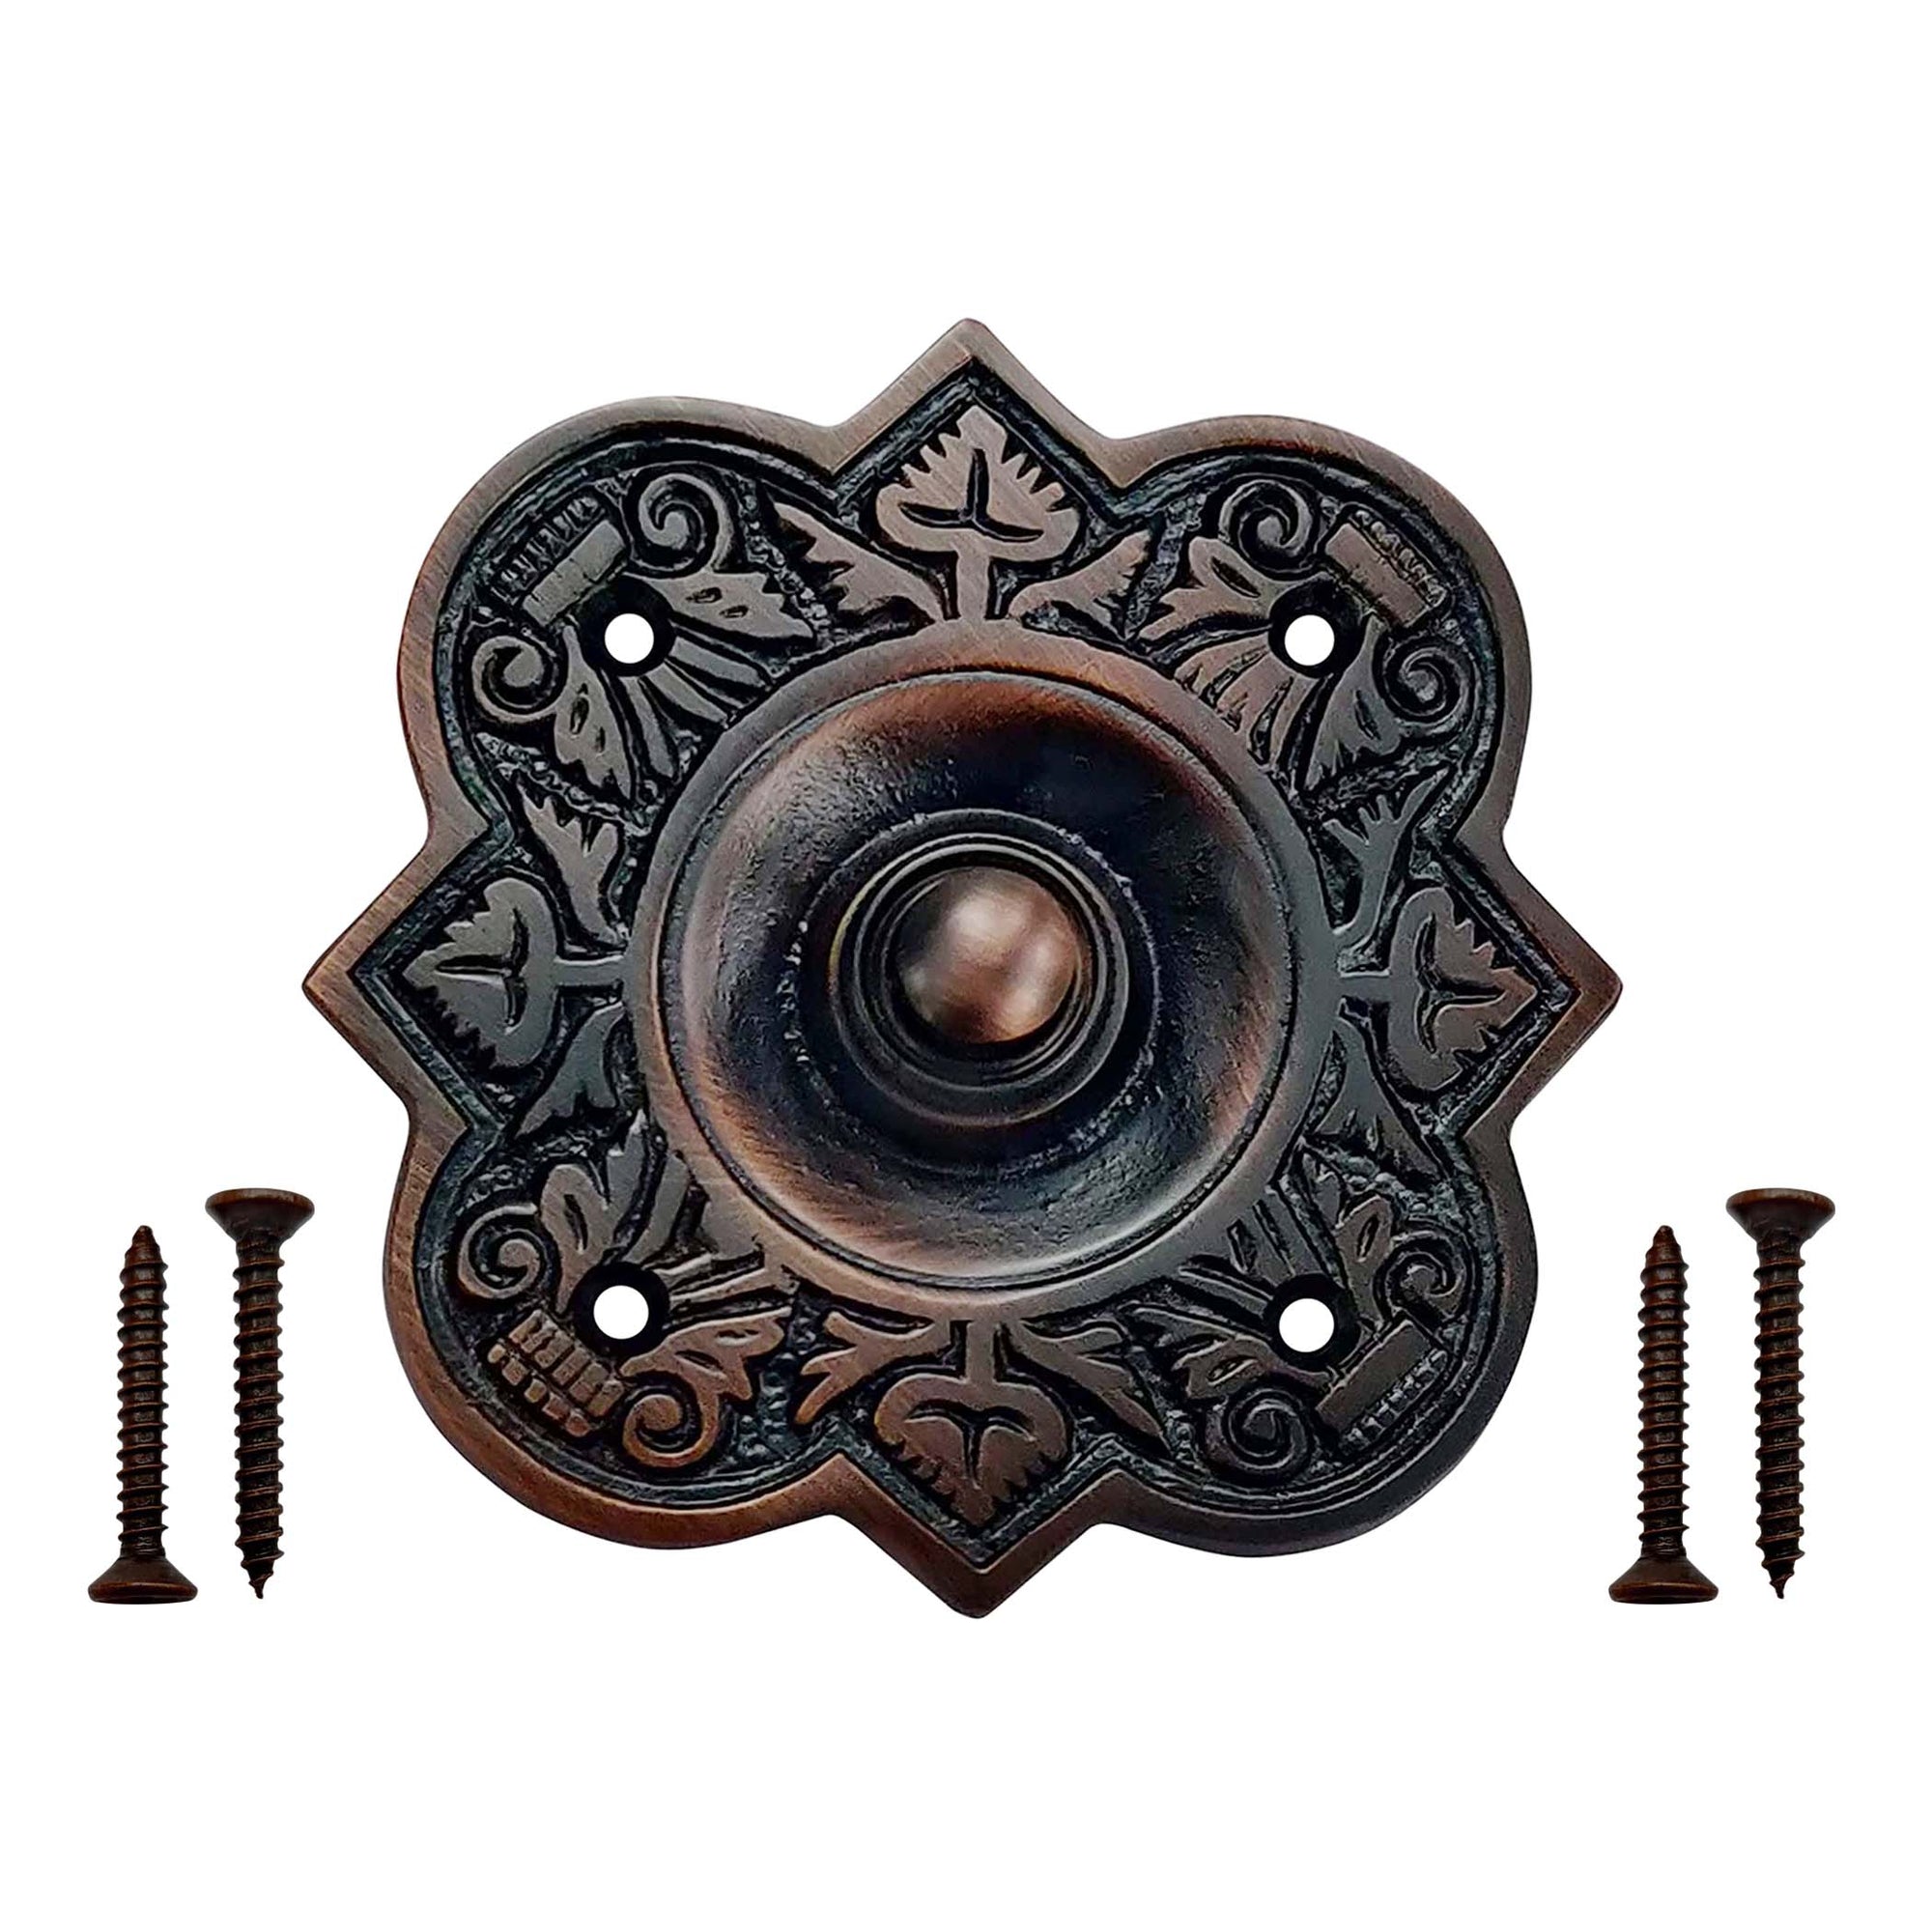 Decorative Doorbell Button – Finest Quality Bell Push Button – Easy to Install Calling Bell Button – Oil Rubbed Bronze